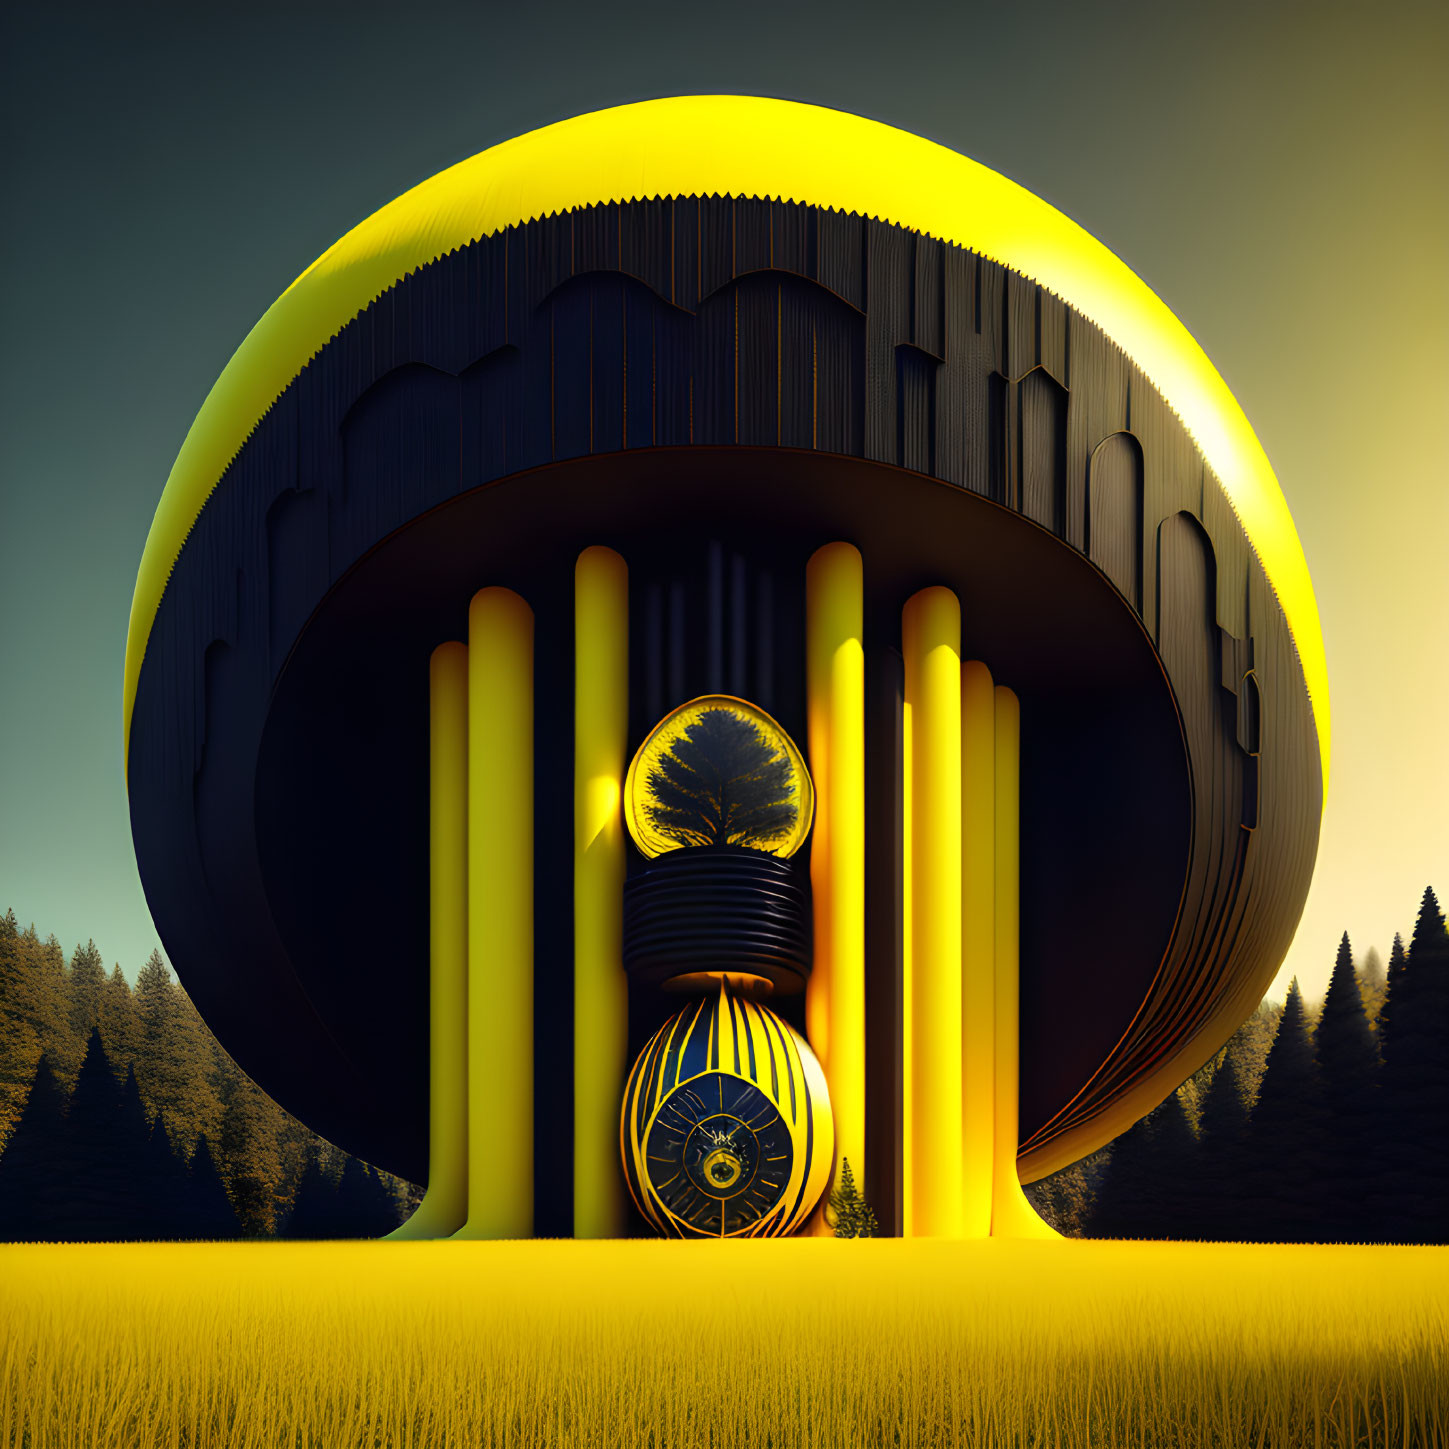 Circular futuristic building with yellow columns and black bulb entrance in forest setting